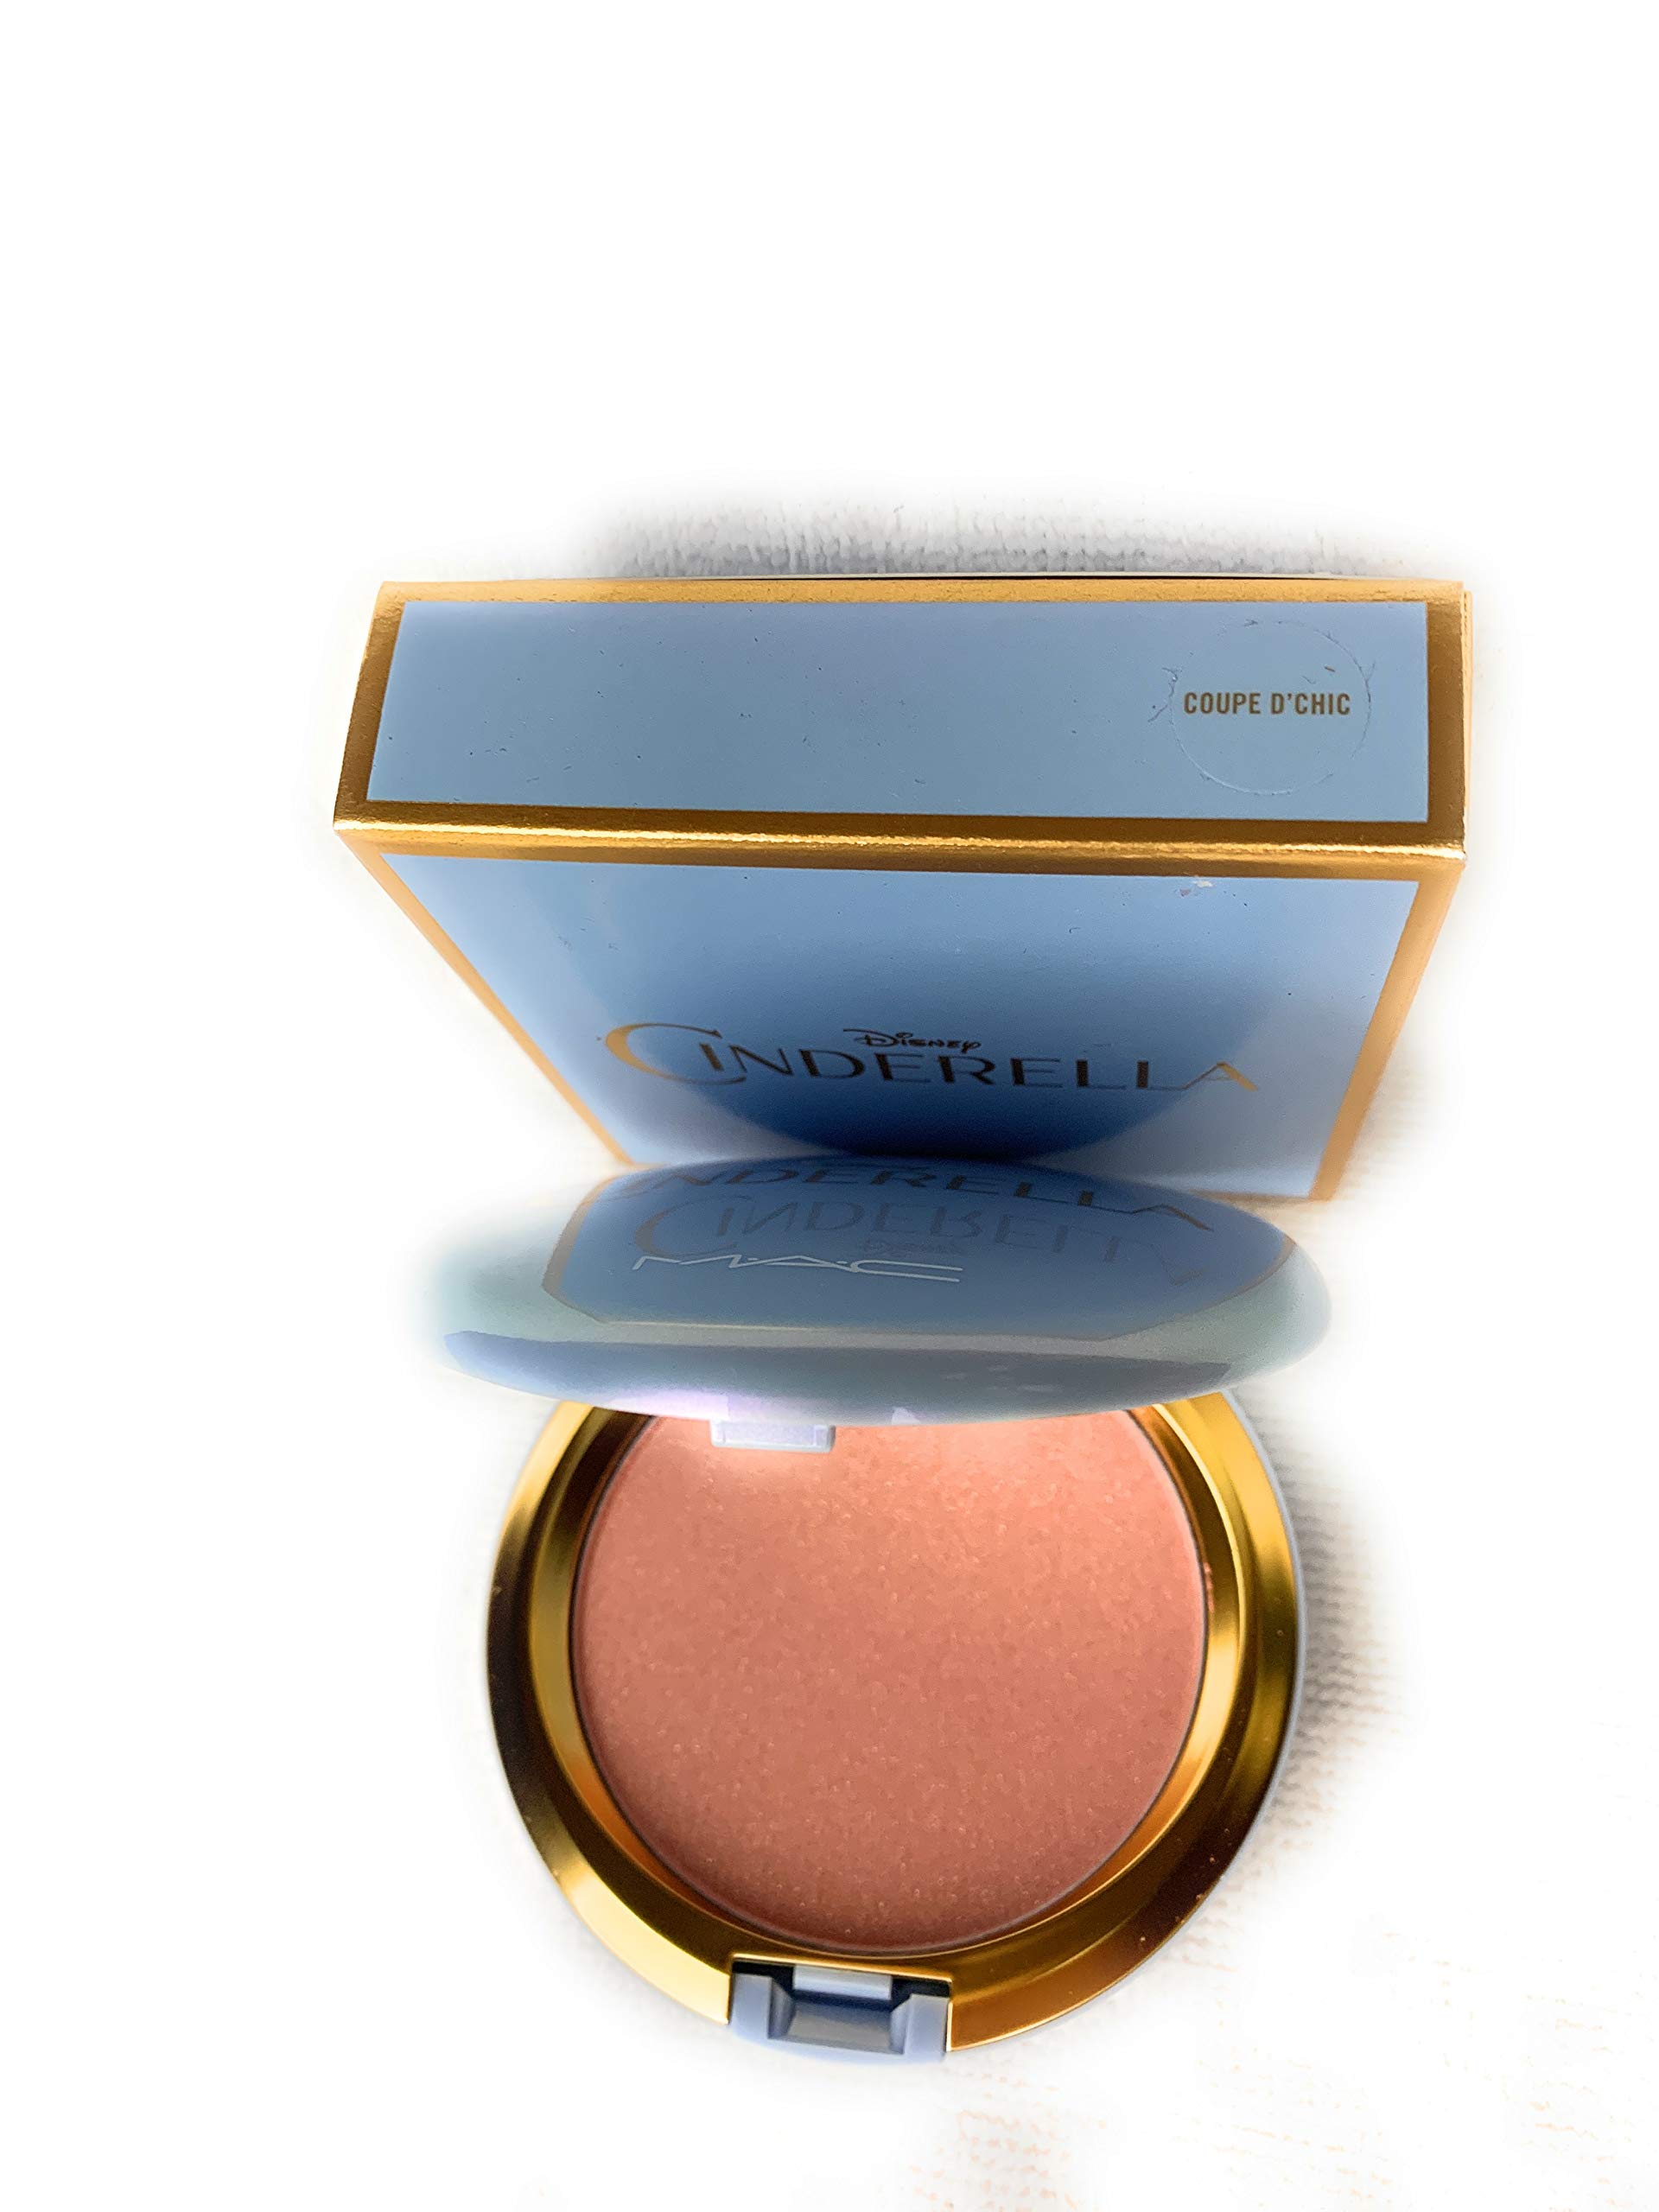 MAC Limited Edition Cinderella Collection Beauty Powder - Coupe D' Chic